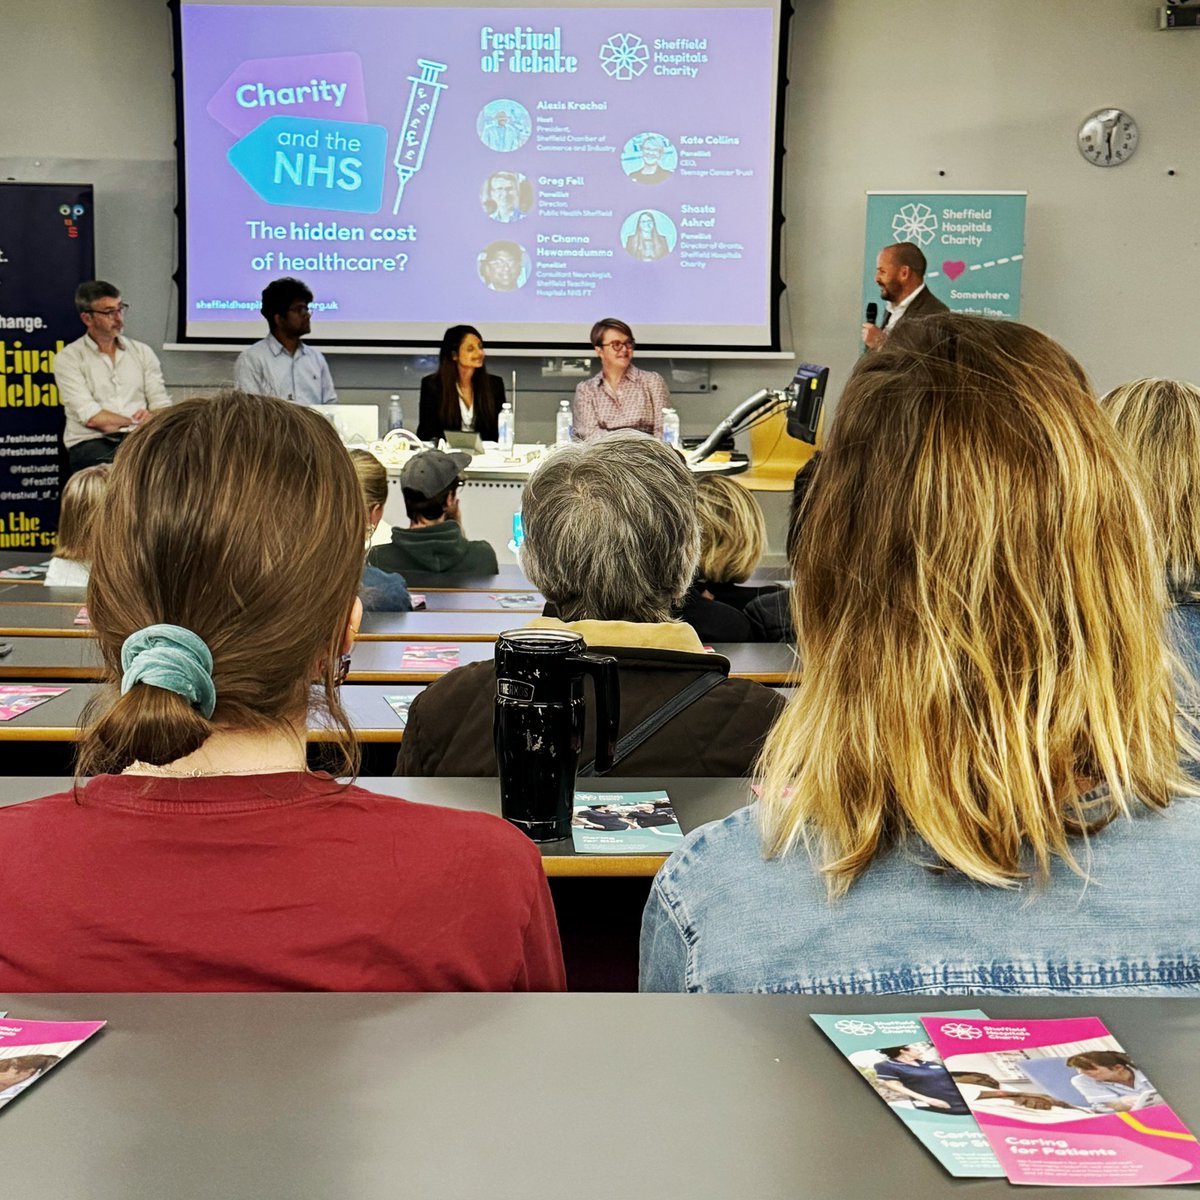 Amazing turnout for our @FestOfDebate event last night, ‘Charity and the NHS: the hidden cost of healthcare?’ A massive thank you to all those who joined us, and helped to bring important, thought-provoking questions to the discussion 💡